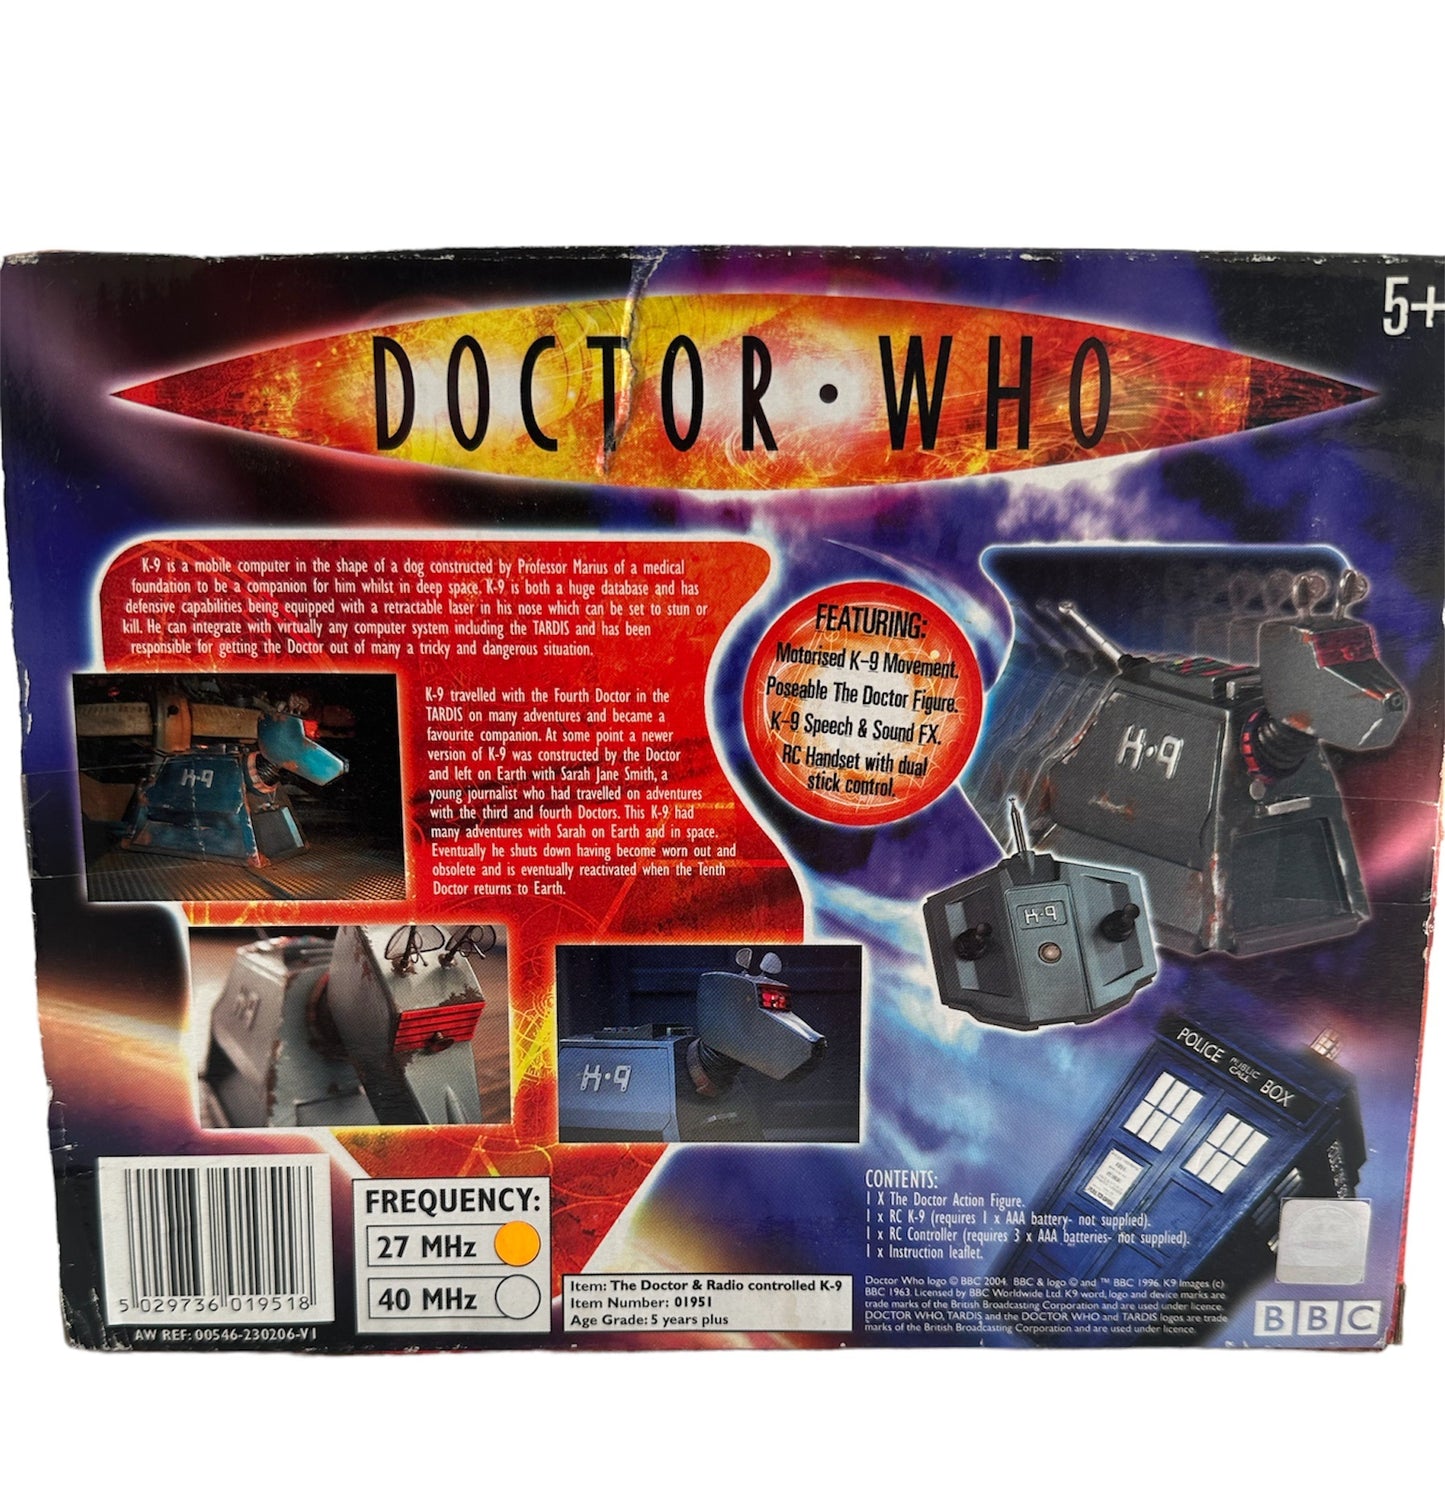 Vintage 2005 Dr Doctor Who Electronic Radio Controlled K-9 and The Doctor Figure - Brand New Shop Stock Room Find